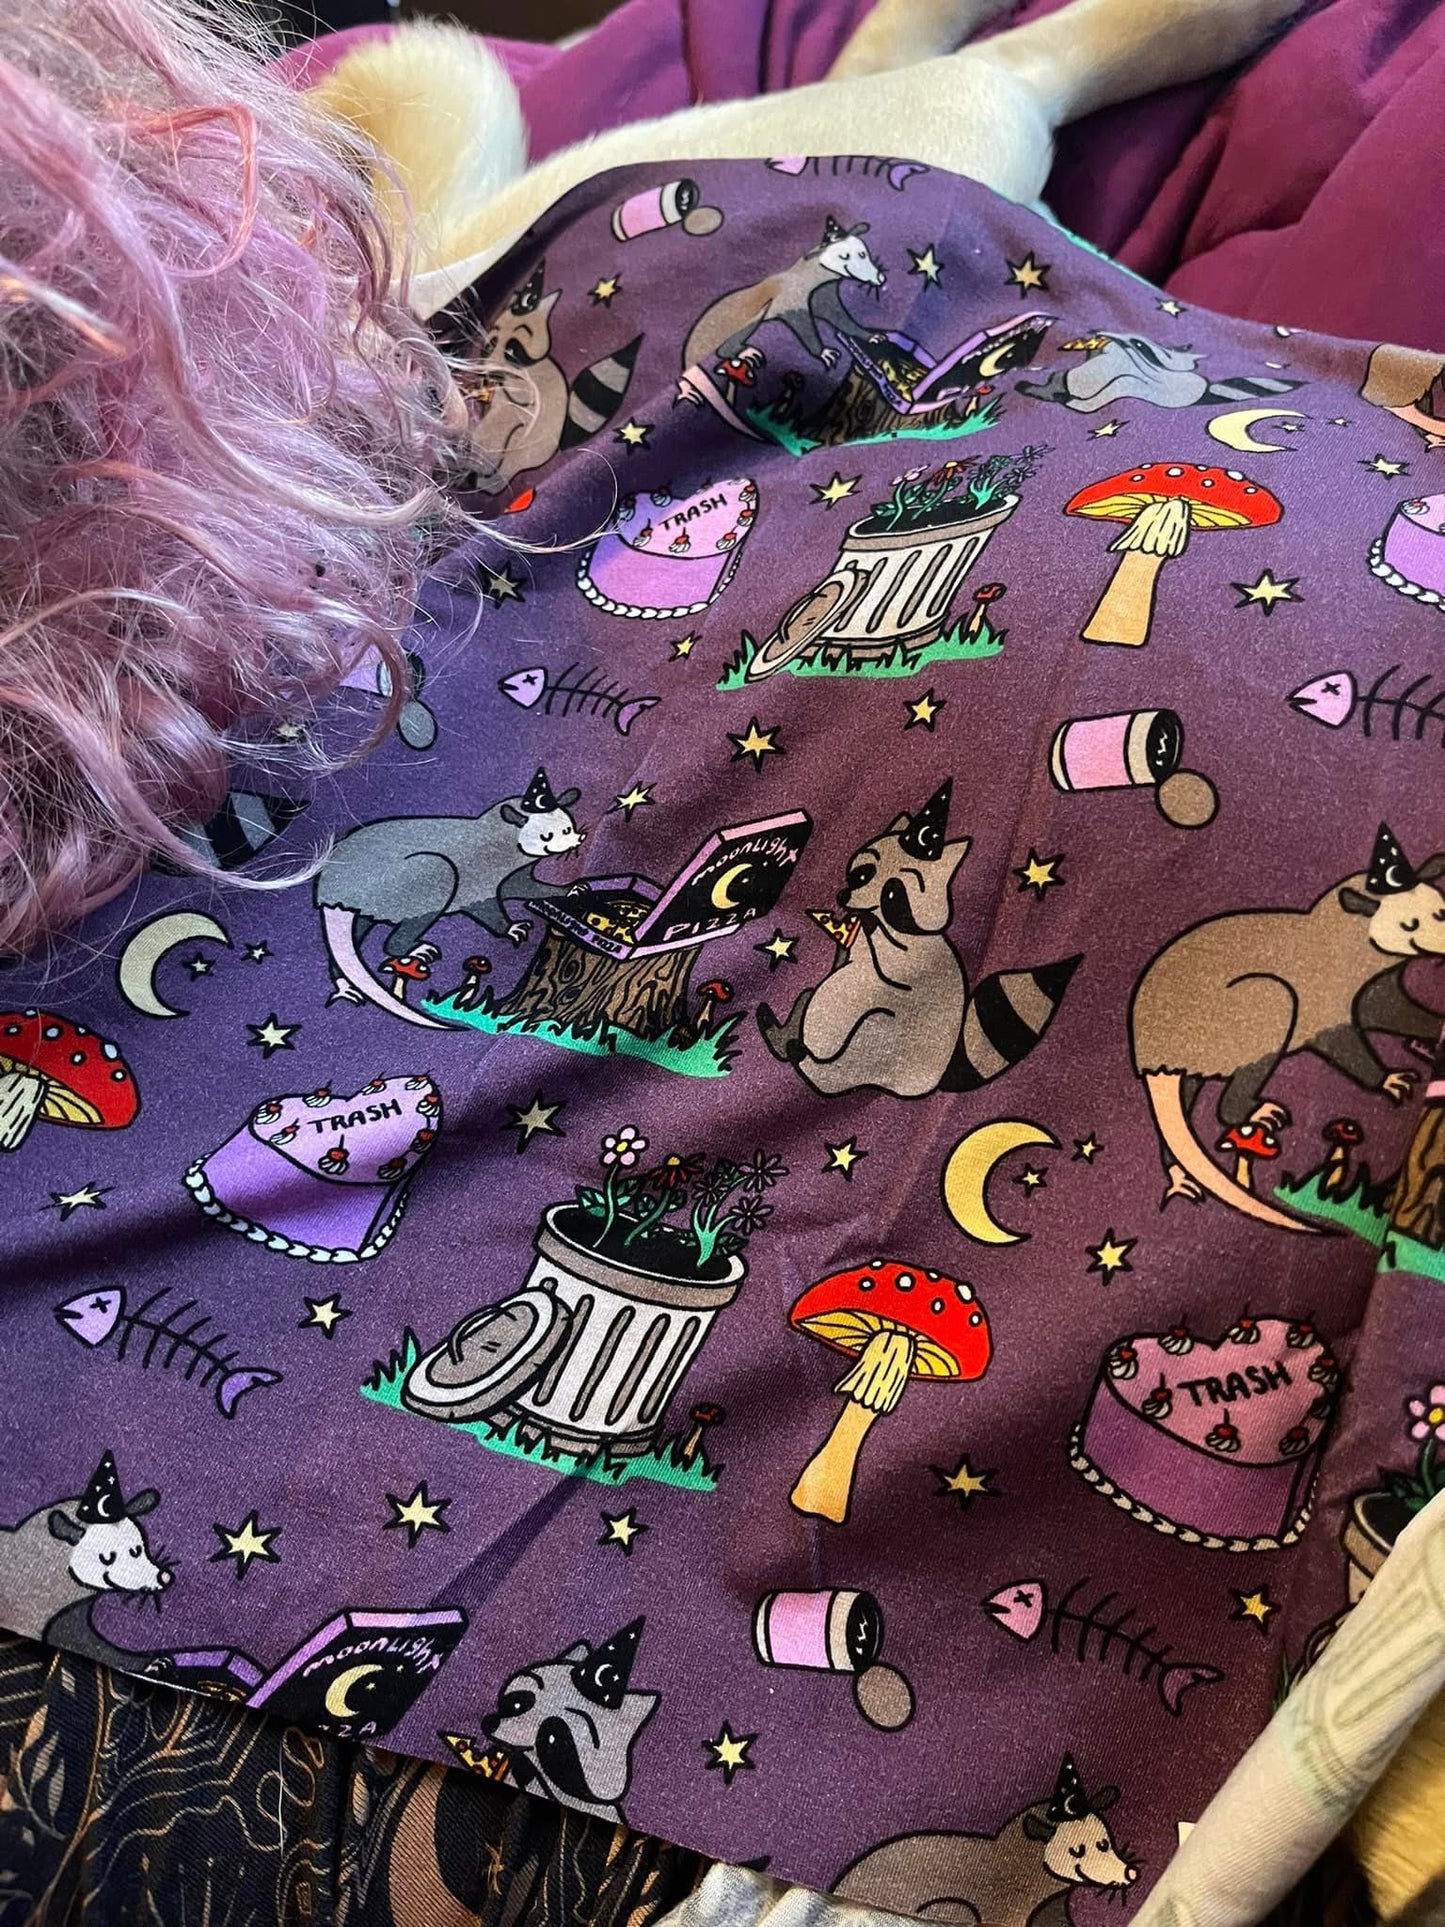 Bestie Trash Party Two Piece Bamboo Set! Opossum + Raccoon + Bats! Witchy Birthday!